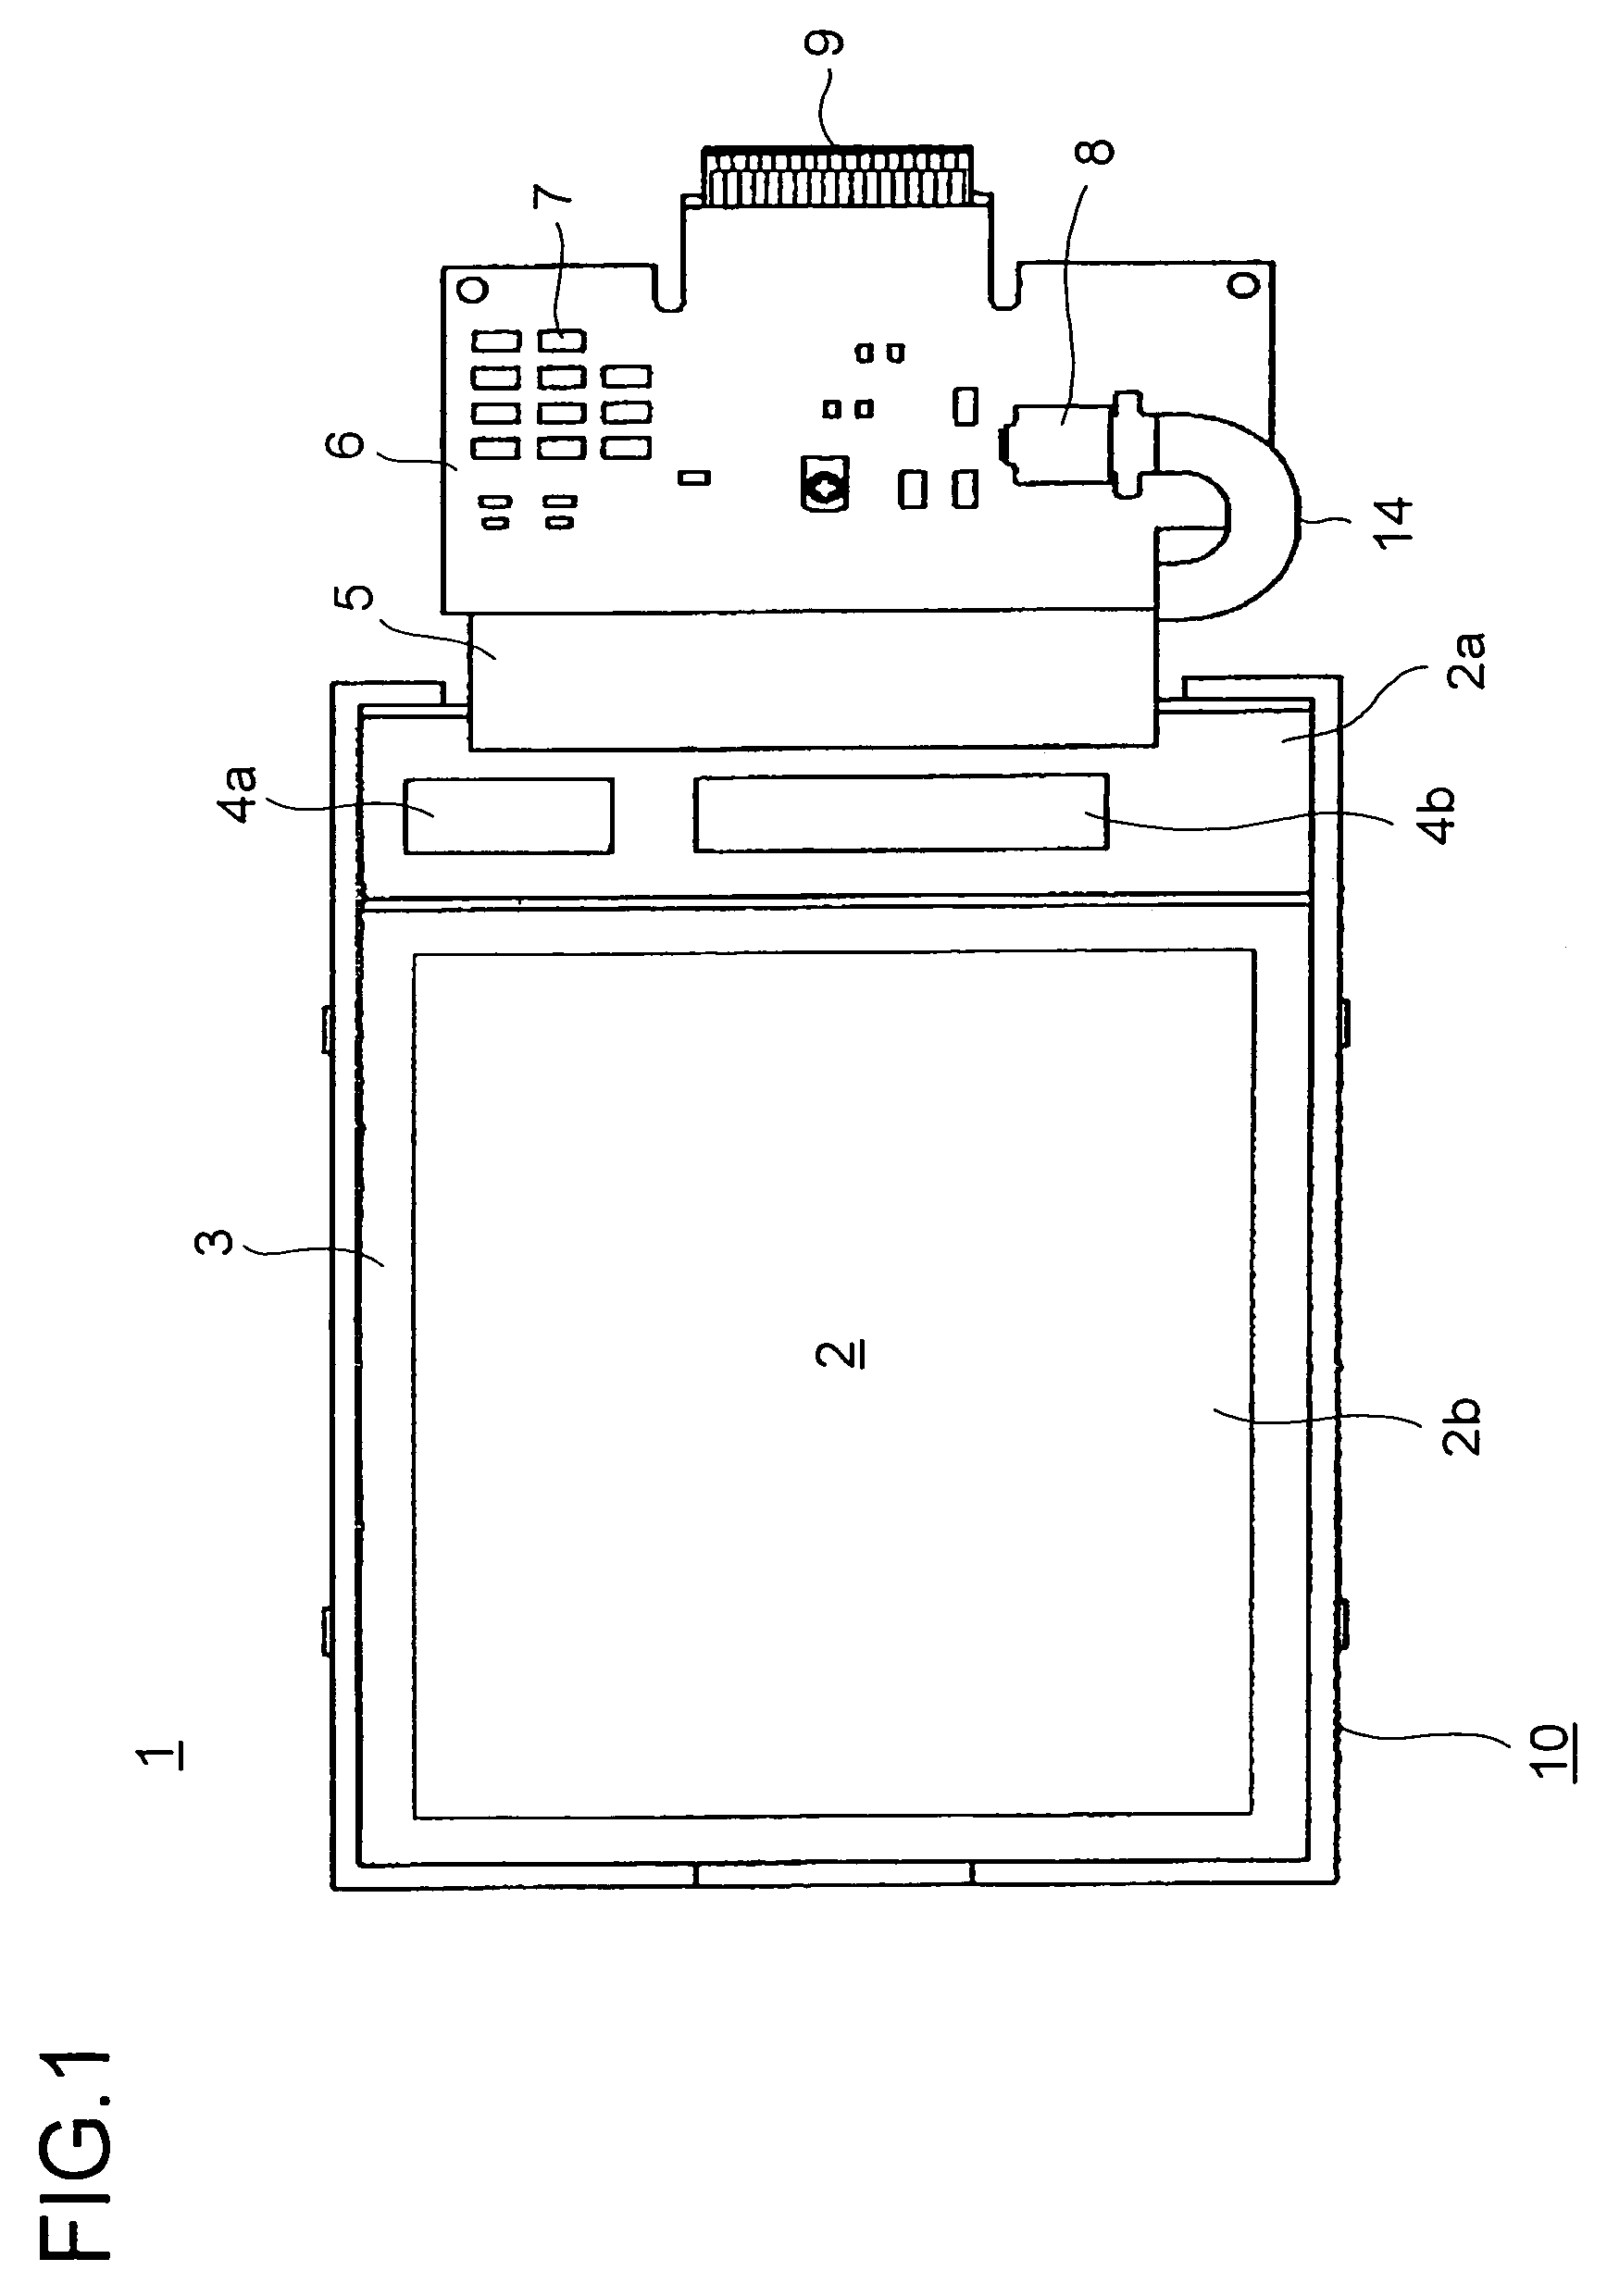 Connecting device of a flexible printed circuit board